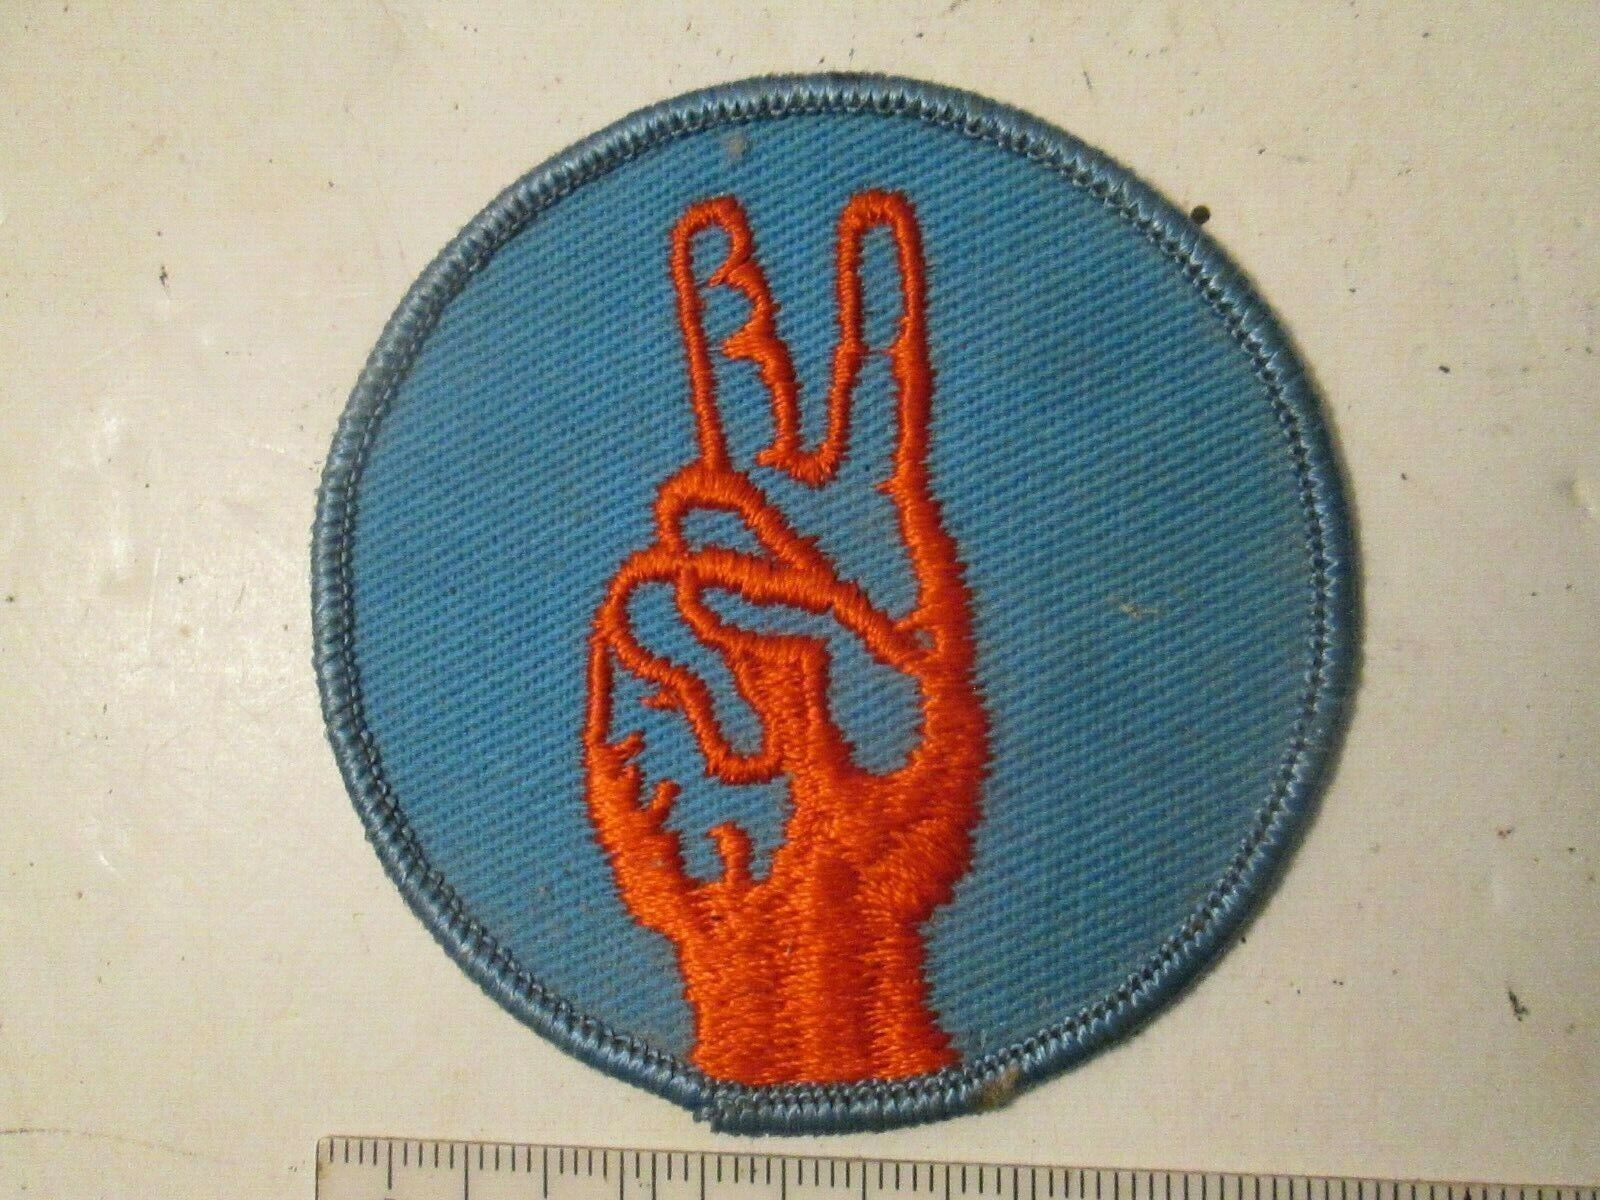 Vintage Peace Sign Patch from 70s Vietnam War Era Original Item Owned Since 70s